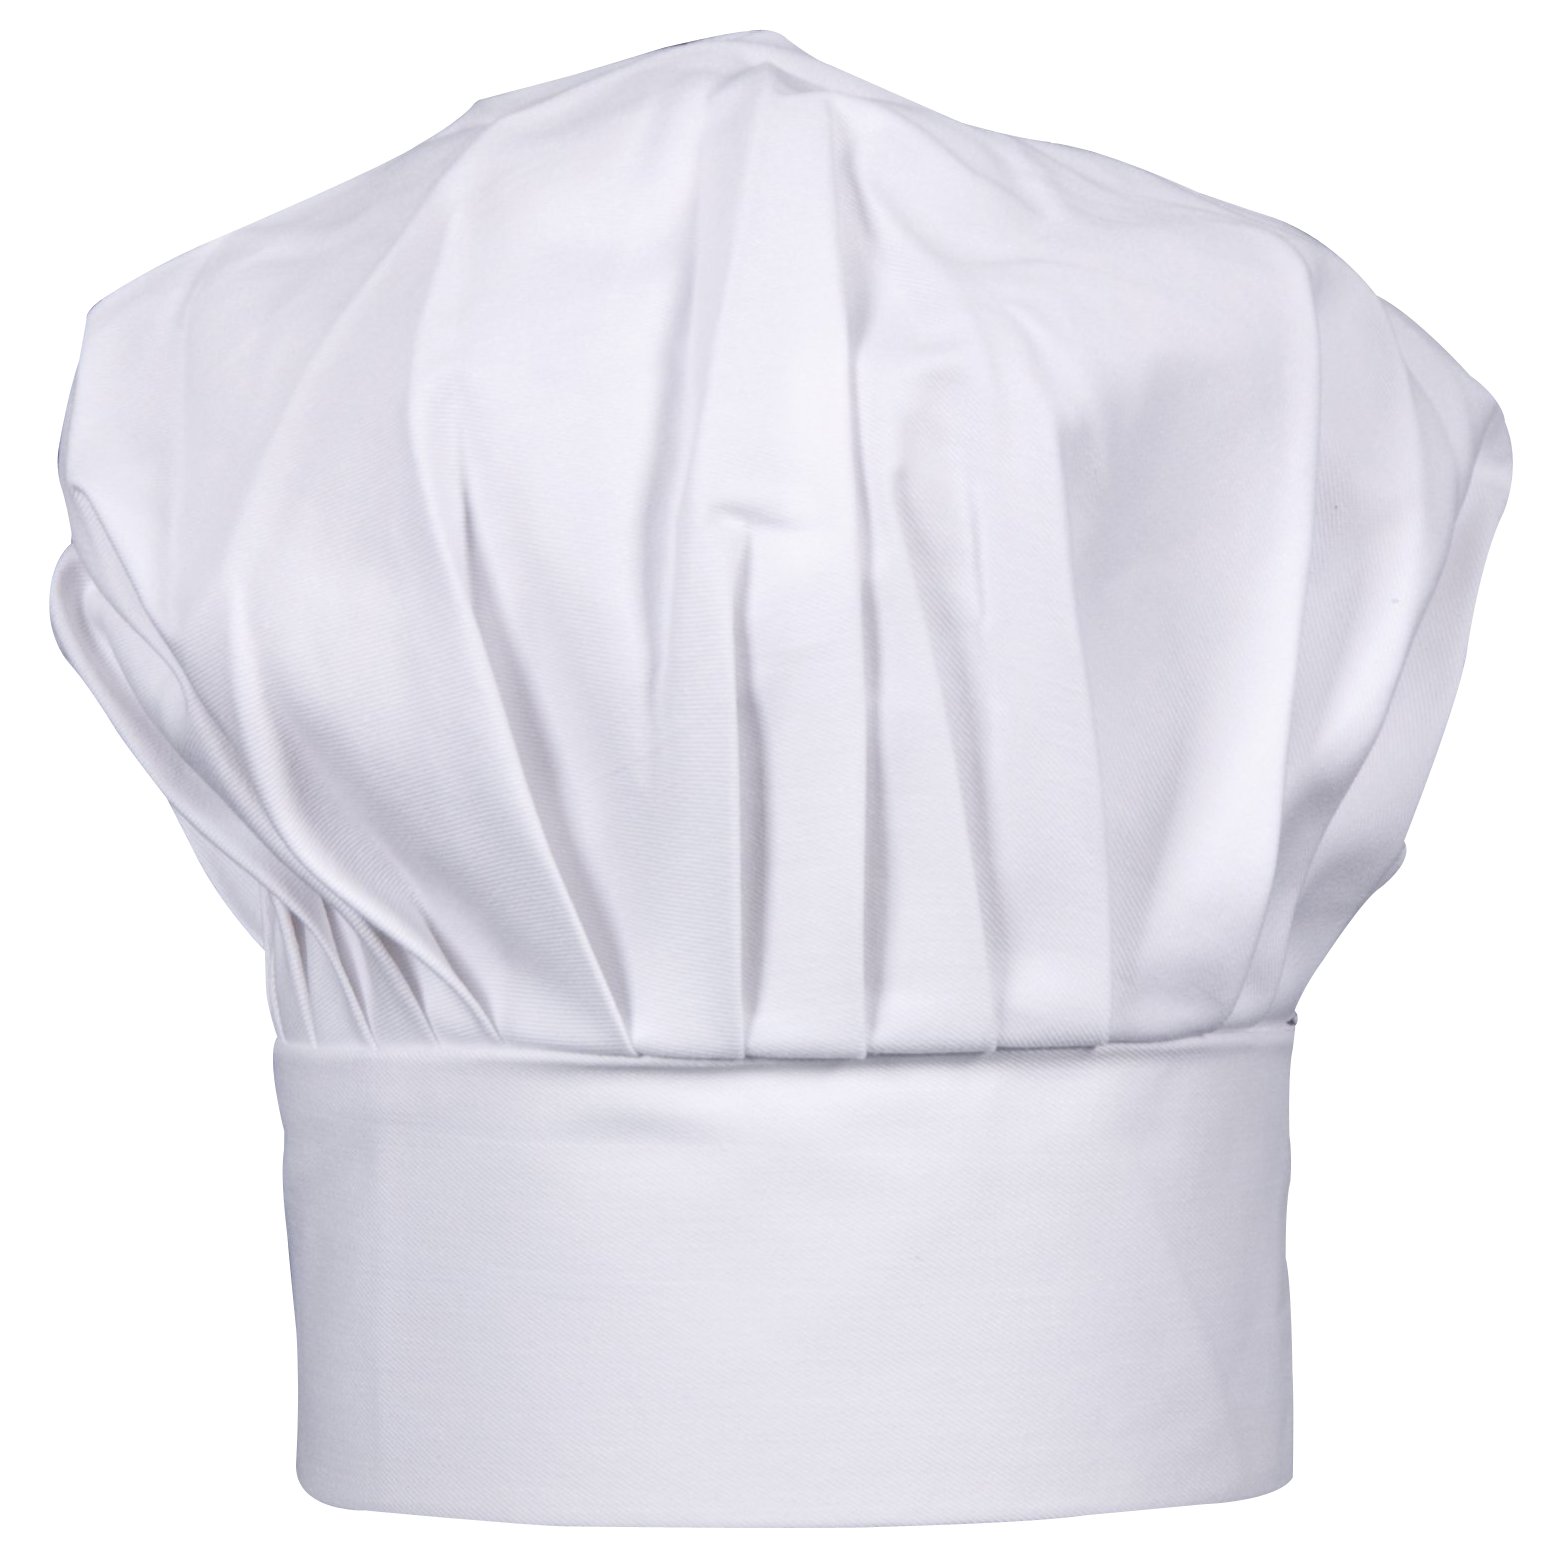 Chef Hat Png - Large collections of hd transparent chef hat png images